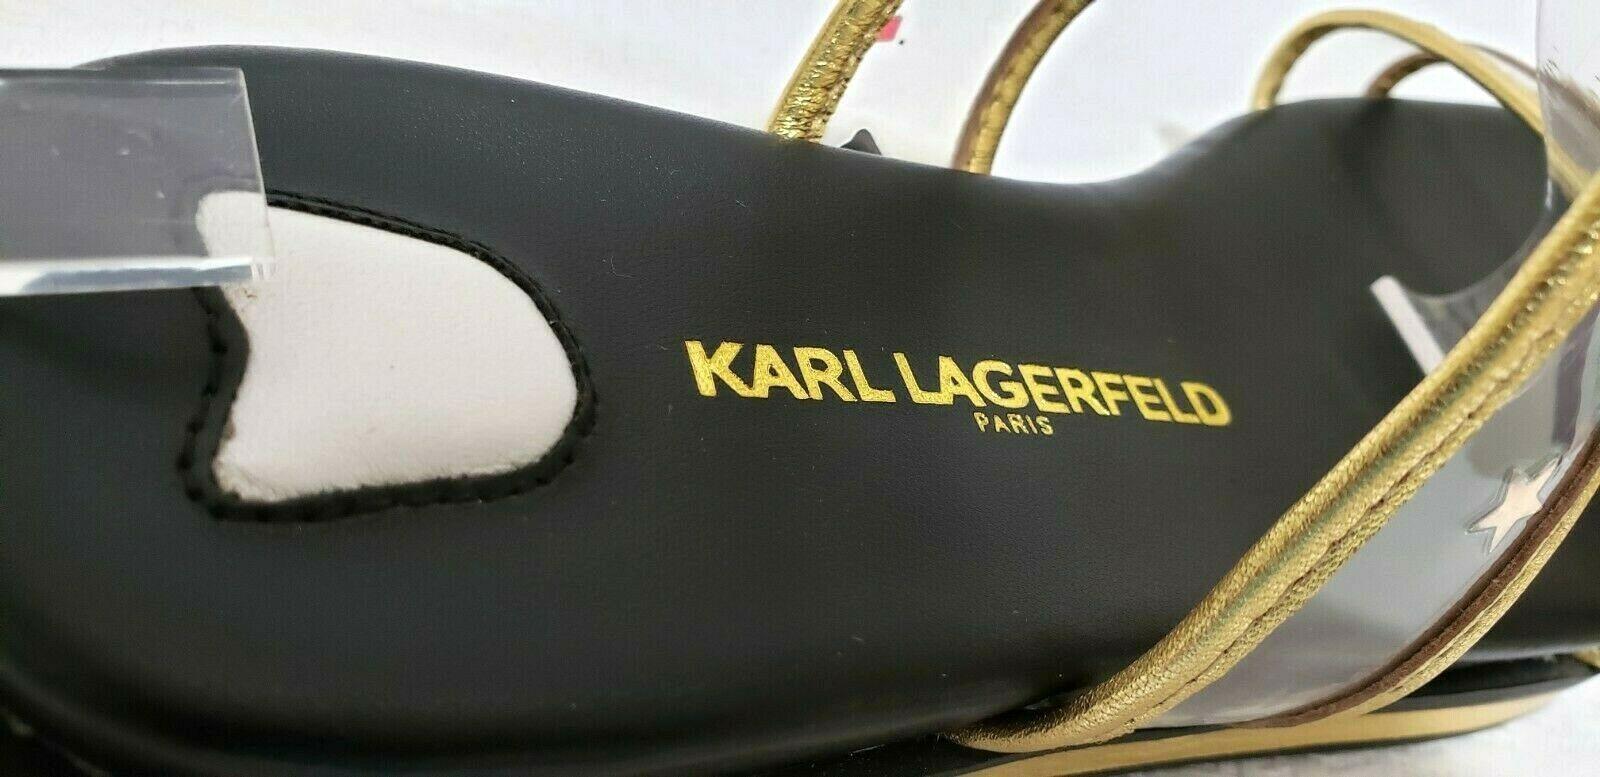 NEW RARE UNIQUE KARL LAGERFELD Leather and PVC print Gold Flats Sandals Size 6 - SVNYFancy